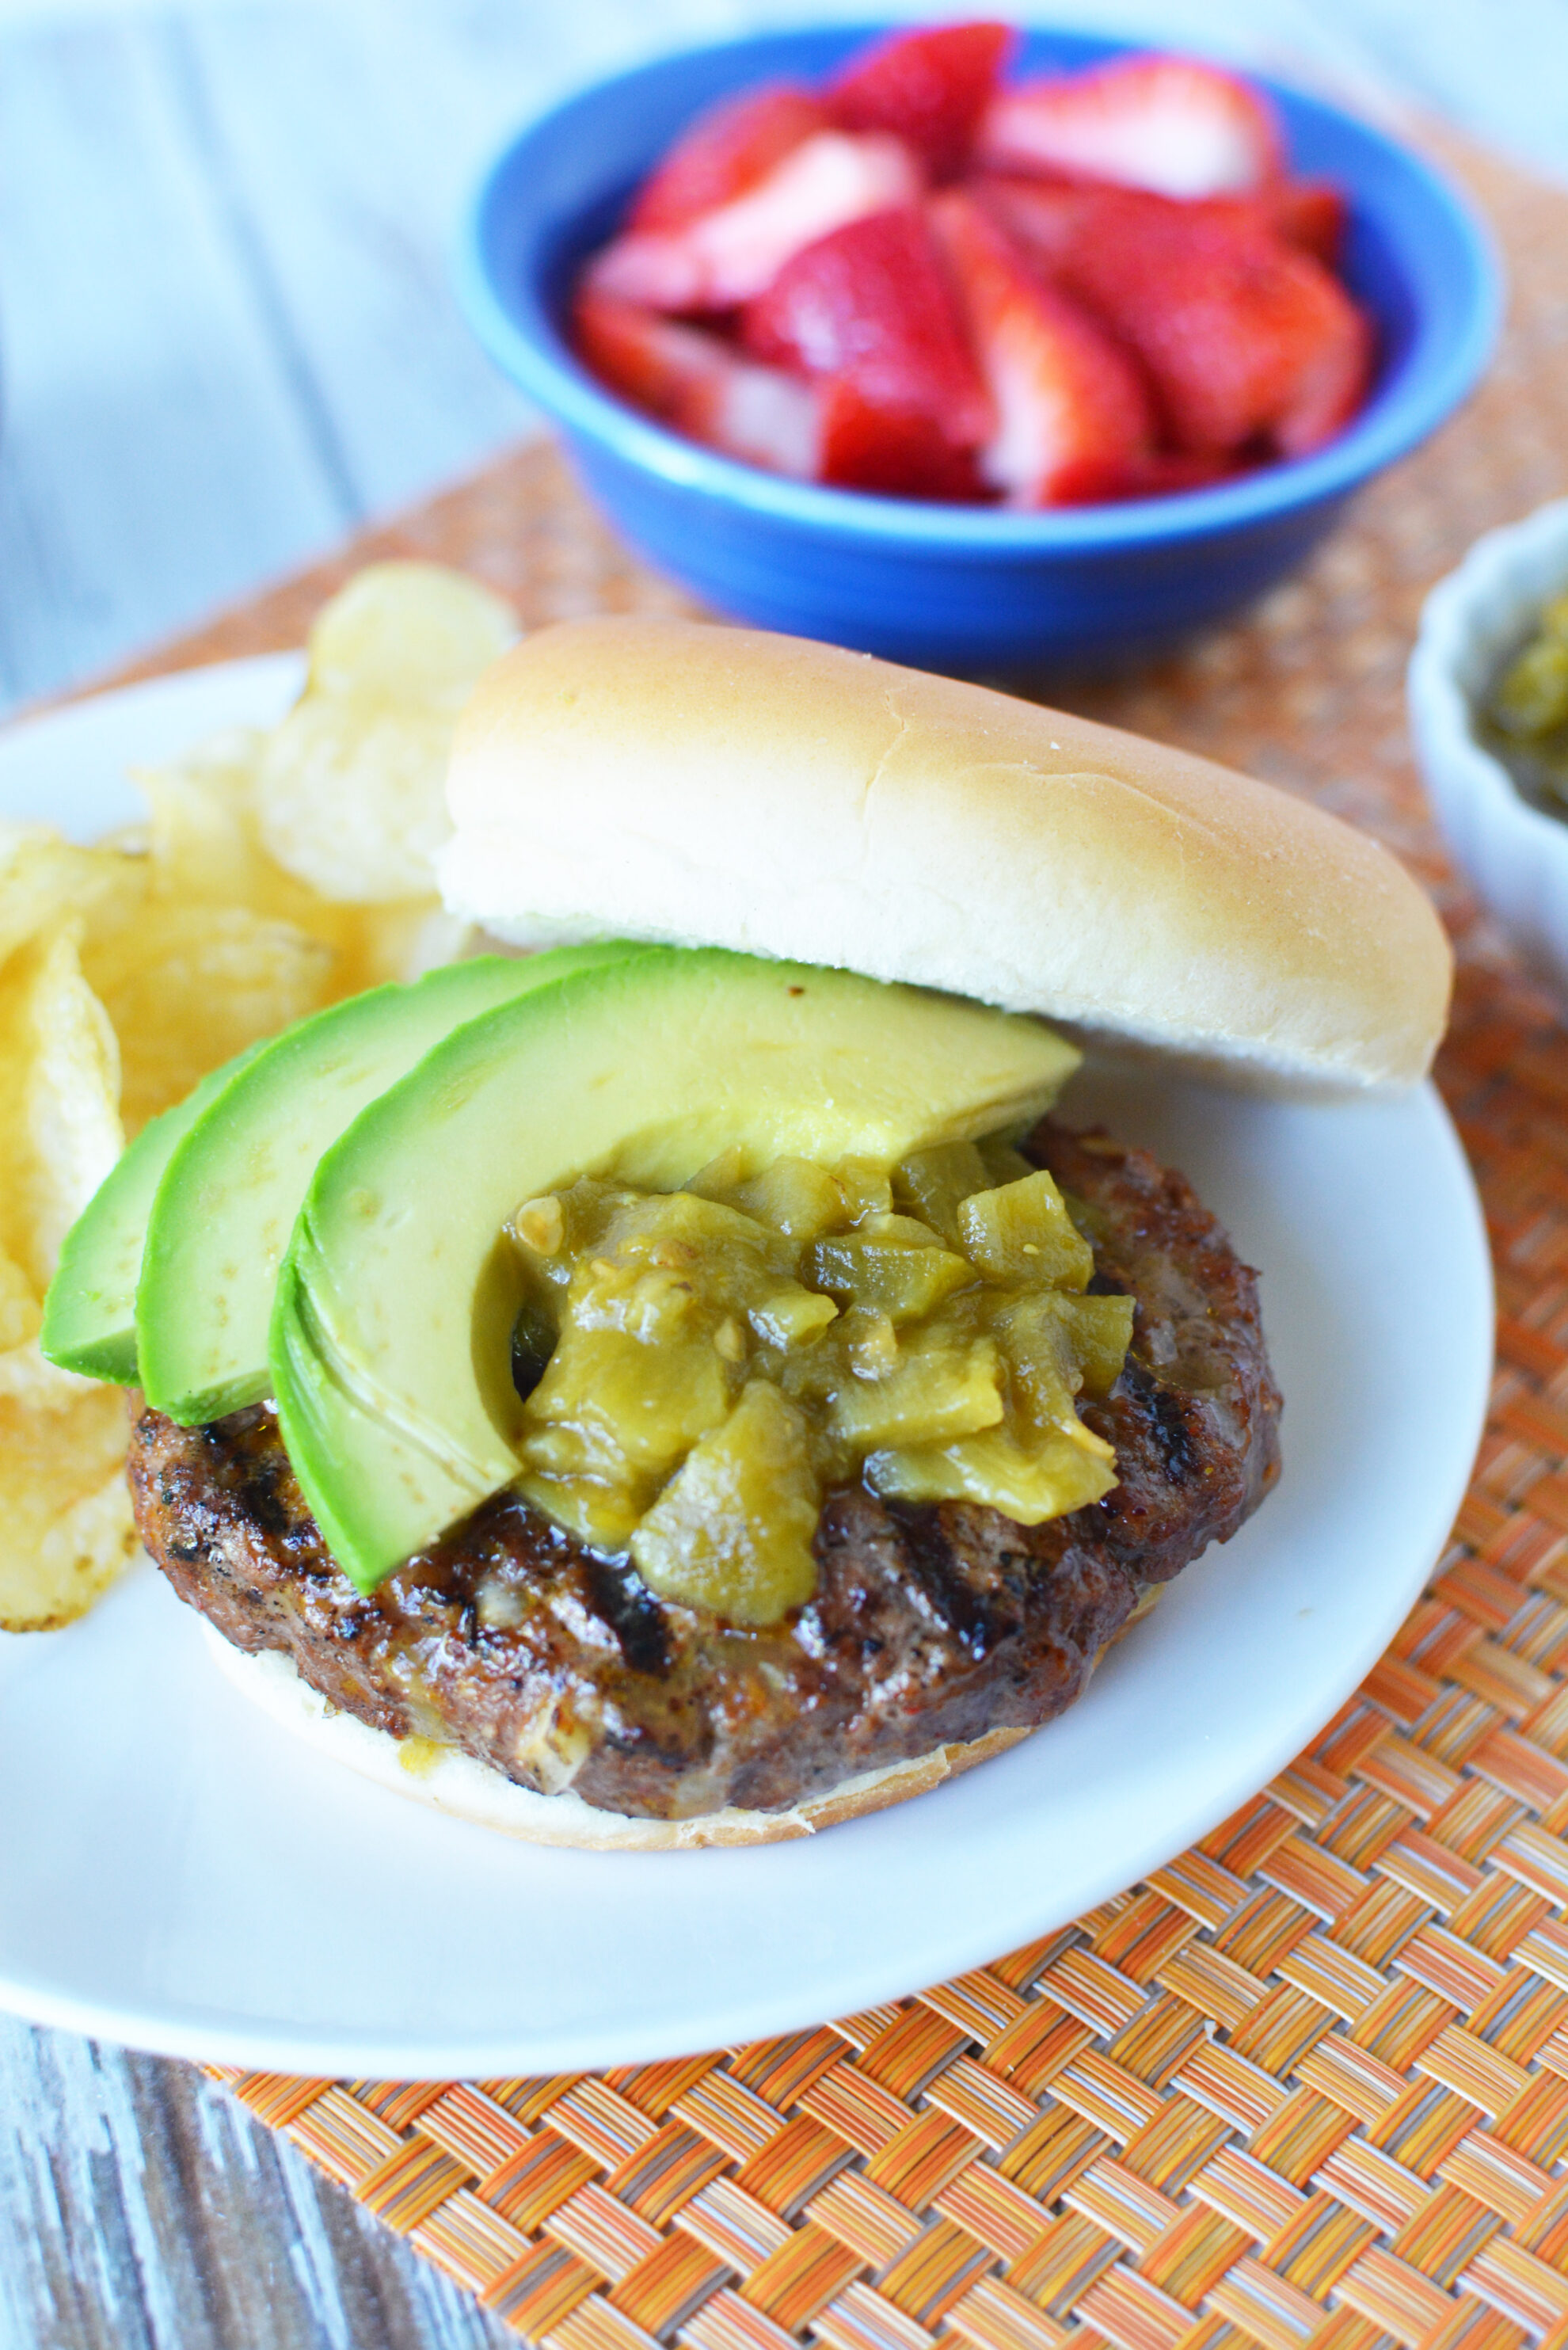 Green Chile Burgers - $5 Dinners | Recipes & Meal Plans